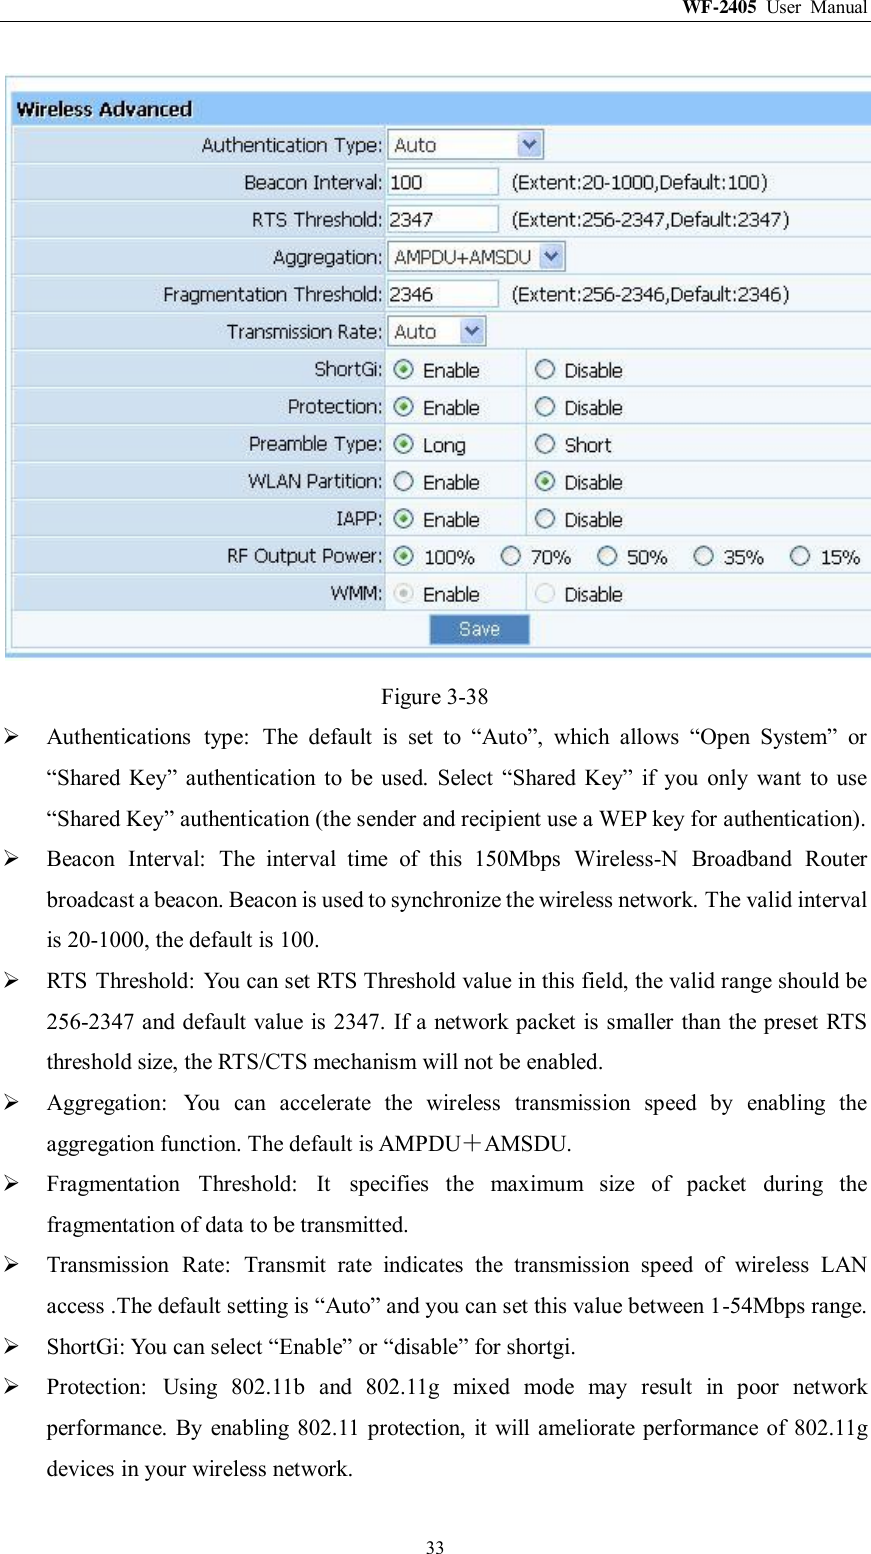 WF-2405  User  Manual  33  Figure 3-38  Authentications  type:  The  default  is  set  to  “Auto”,  which  allows  “Open  System”  or “Shared  Key”  authentication  to  be  used.  Select  “Shared  Key”  if  you  only  want  to  use “Shared Key” authentication (the sender and recipient use a WEP key for authentication).  Beacon  Interval:  The  interval  time  of  this  150Mbps  Wireless-N  Broadband  Router broadcast a beacon. Beacon is used to synchronize the wireless network. The valid interval is 20-1000, the default is 100.  RTS  Threshold:  You can set RTS Threshold value in this field, the valid range should be 256-2347 and default value is 2347. If a network packet is smaller than the preset RTS threshold size, the RTS/CTS mechanism will not be enabled.  Aggregation:  You  can  accelerate  the  wireless  transmission  speed  by  enabling  the aggregation function. The default is AMPDU＋AMSDU.  Fragmentation  Threshold:  It  specifies  the  maximum  size  of  packet  during  the fragmentation of data to be transmitted.  Transmission  Rate:  Transmit  rate  indicates  the  transmission  speed  of  wireless  LAN access .The default setting is “Auto” and you can set this value between 1-54Mbps range.  ShortGi: You can select “Enable” or “disable” for shortgi.  Protection:  Using  802.11b  and  802.11g  mixed  mode  may  result  in  poor  network performance. By  enabling  802.11  protection,  it will ameliorate performance of  802.11g devices in your wireless network. 